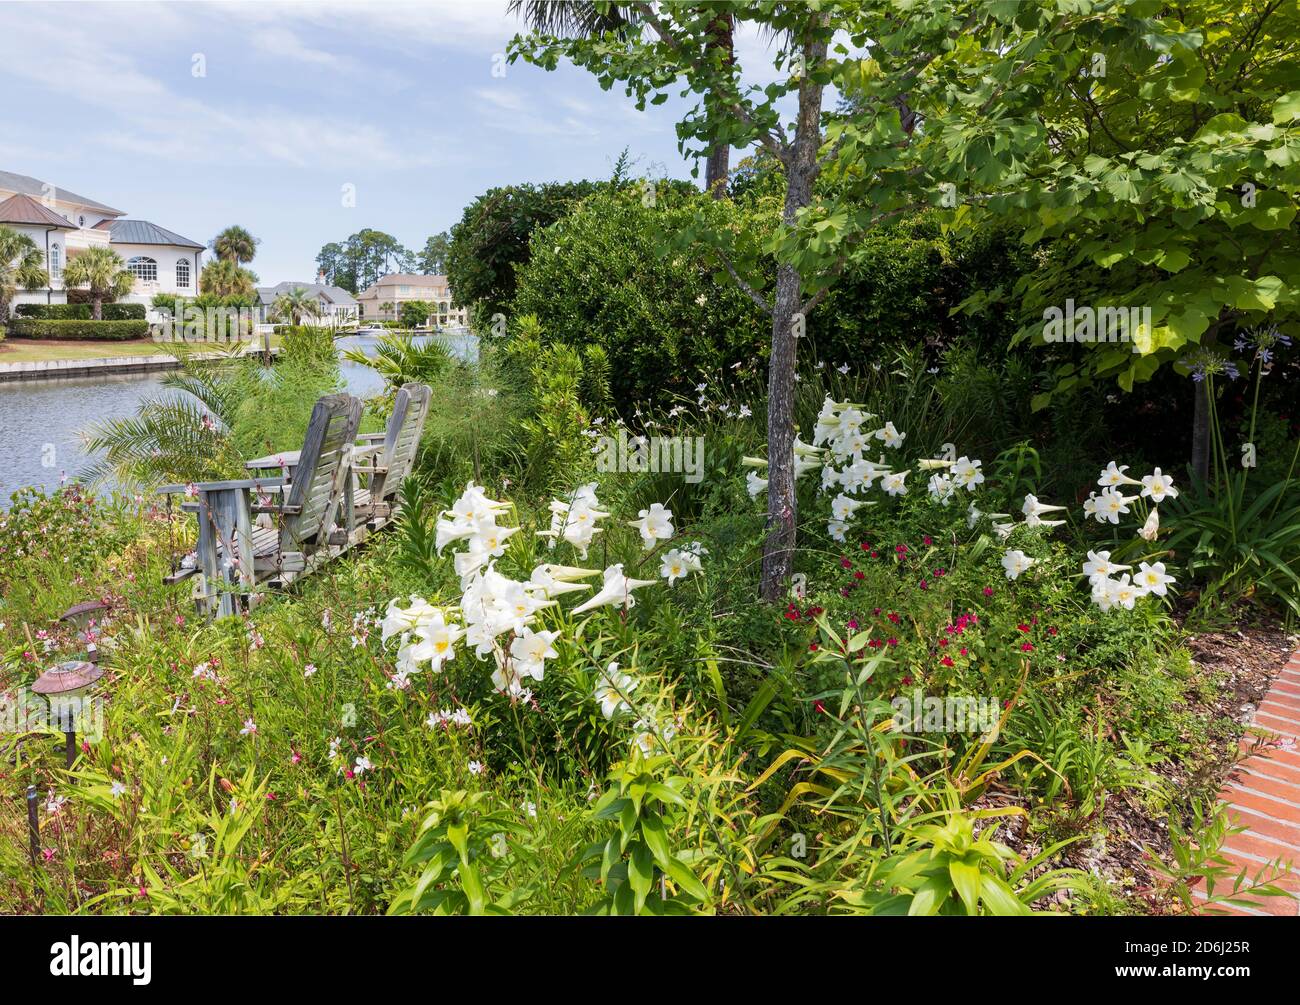 A South Carolina garden in May. White trumpet lilies, salvia, African iris, and gaura under a gingko tree with a swing garden bench beside a canal. Stock Photo